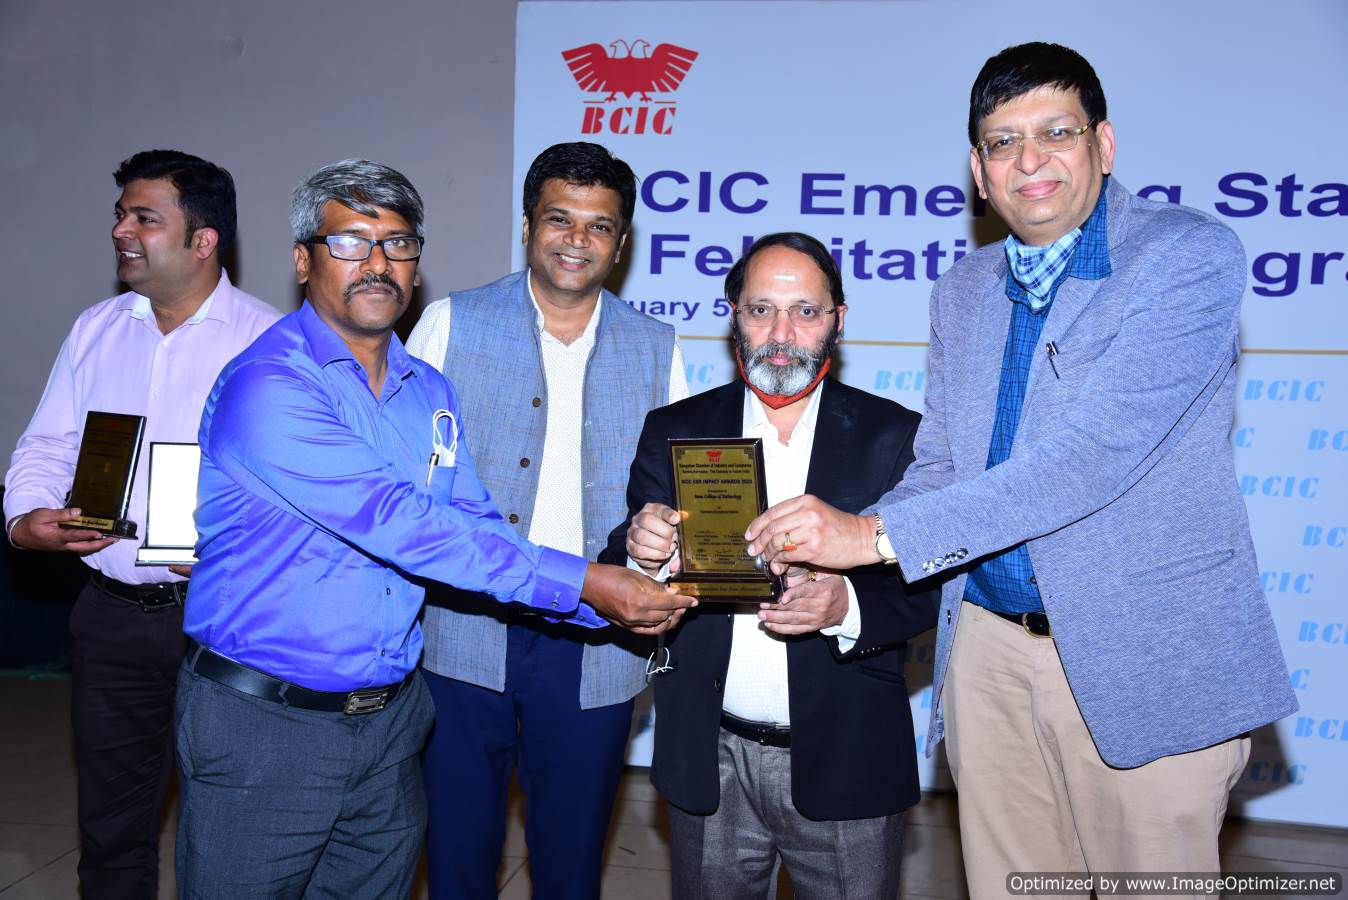 Bcic-awards-gallery-image-16